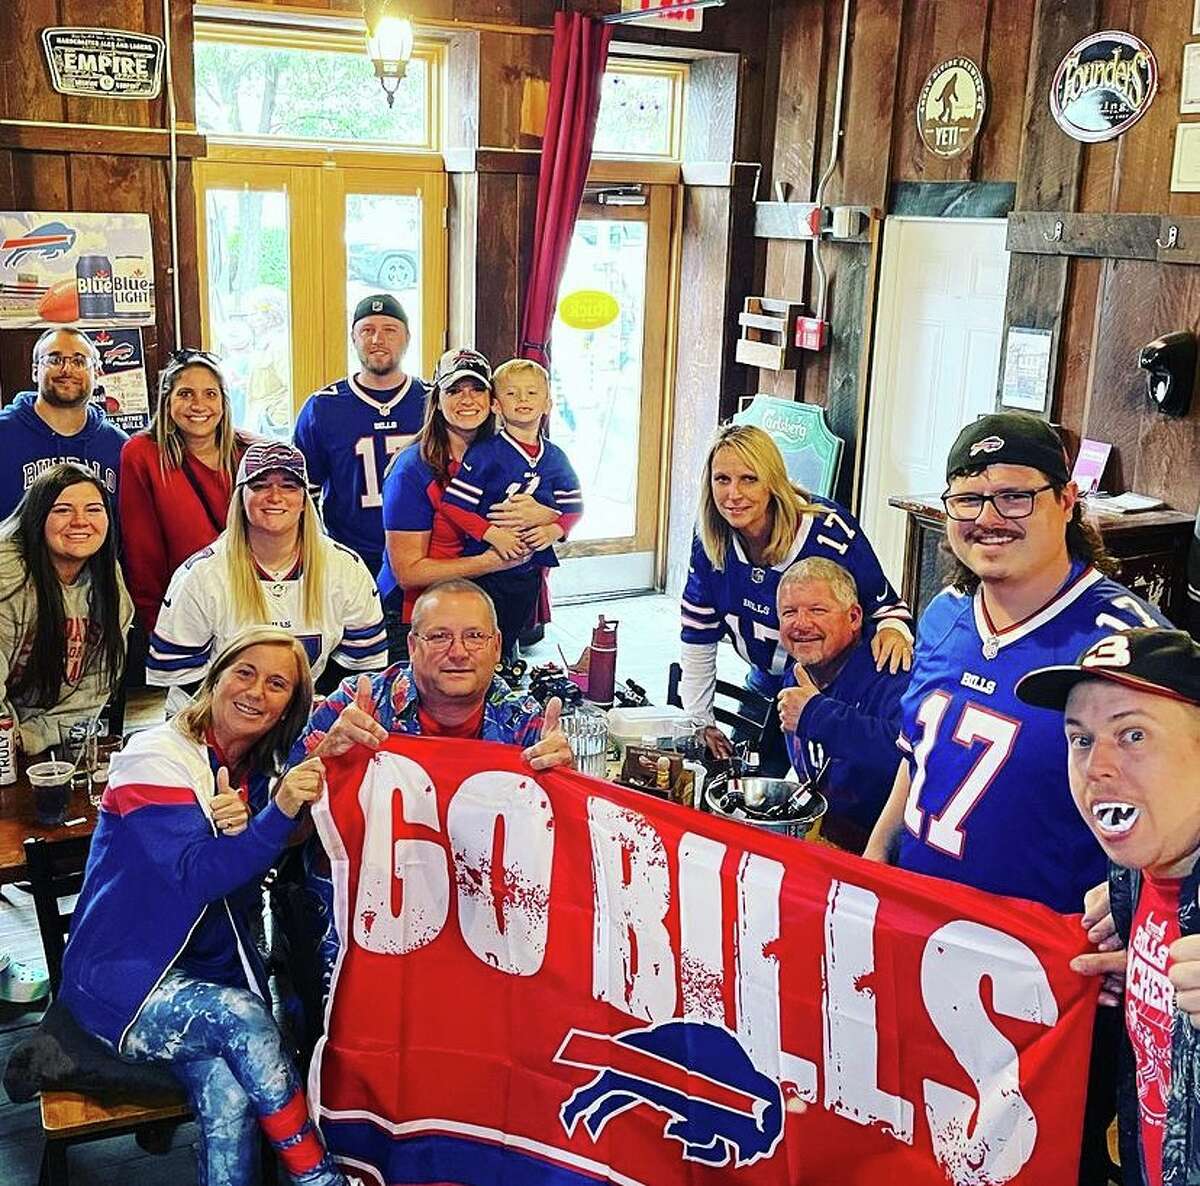 The Ruck in Troy will open at 9 a.m Sunday, Oct. 8, and has applied for a permit to be able to serve alcohol before the normal 10 a.m. opening time to cater to fans of the Buffalo Bills, who are playing in London starting at 9:30 a.m. Sunday.